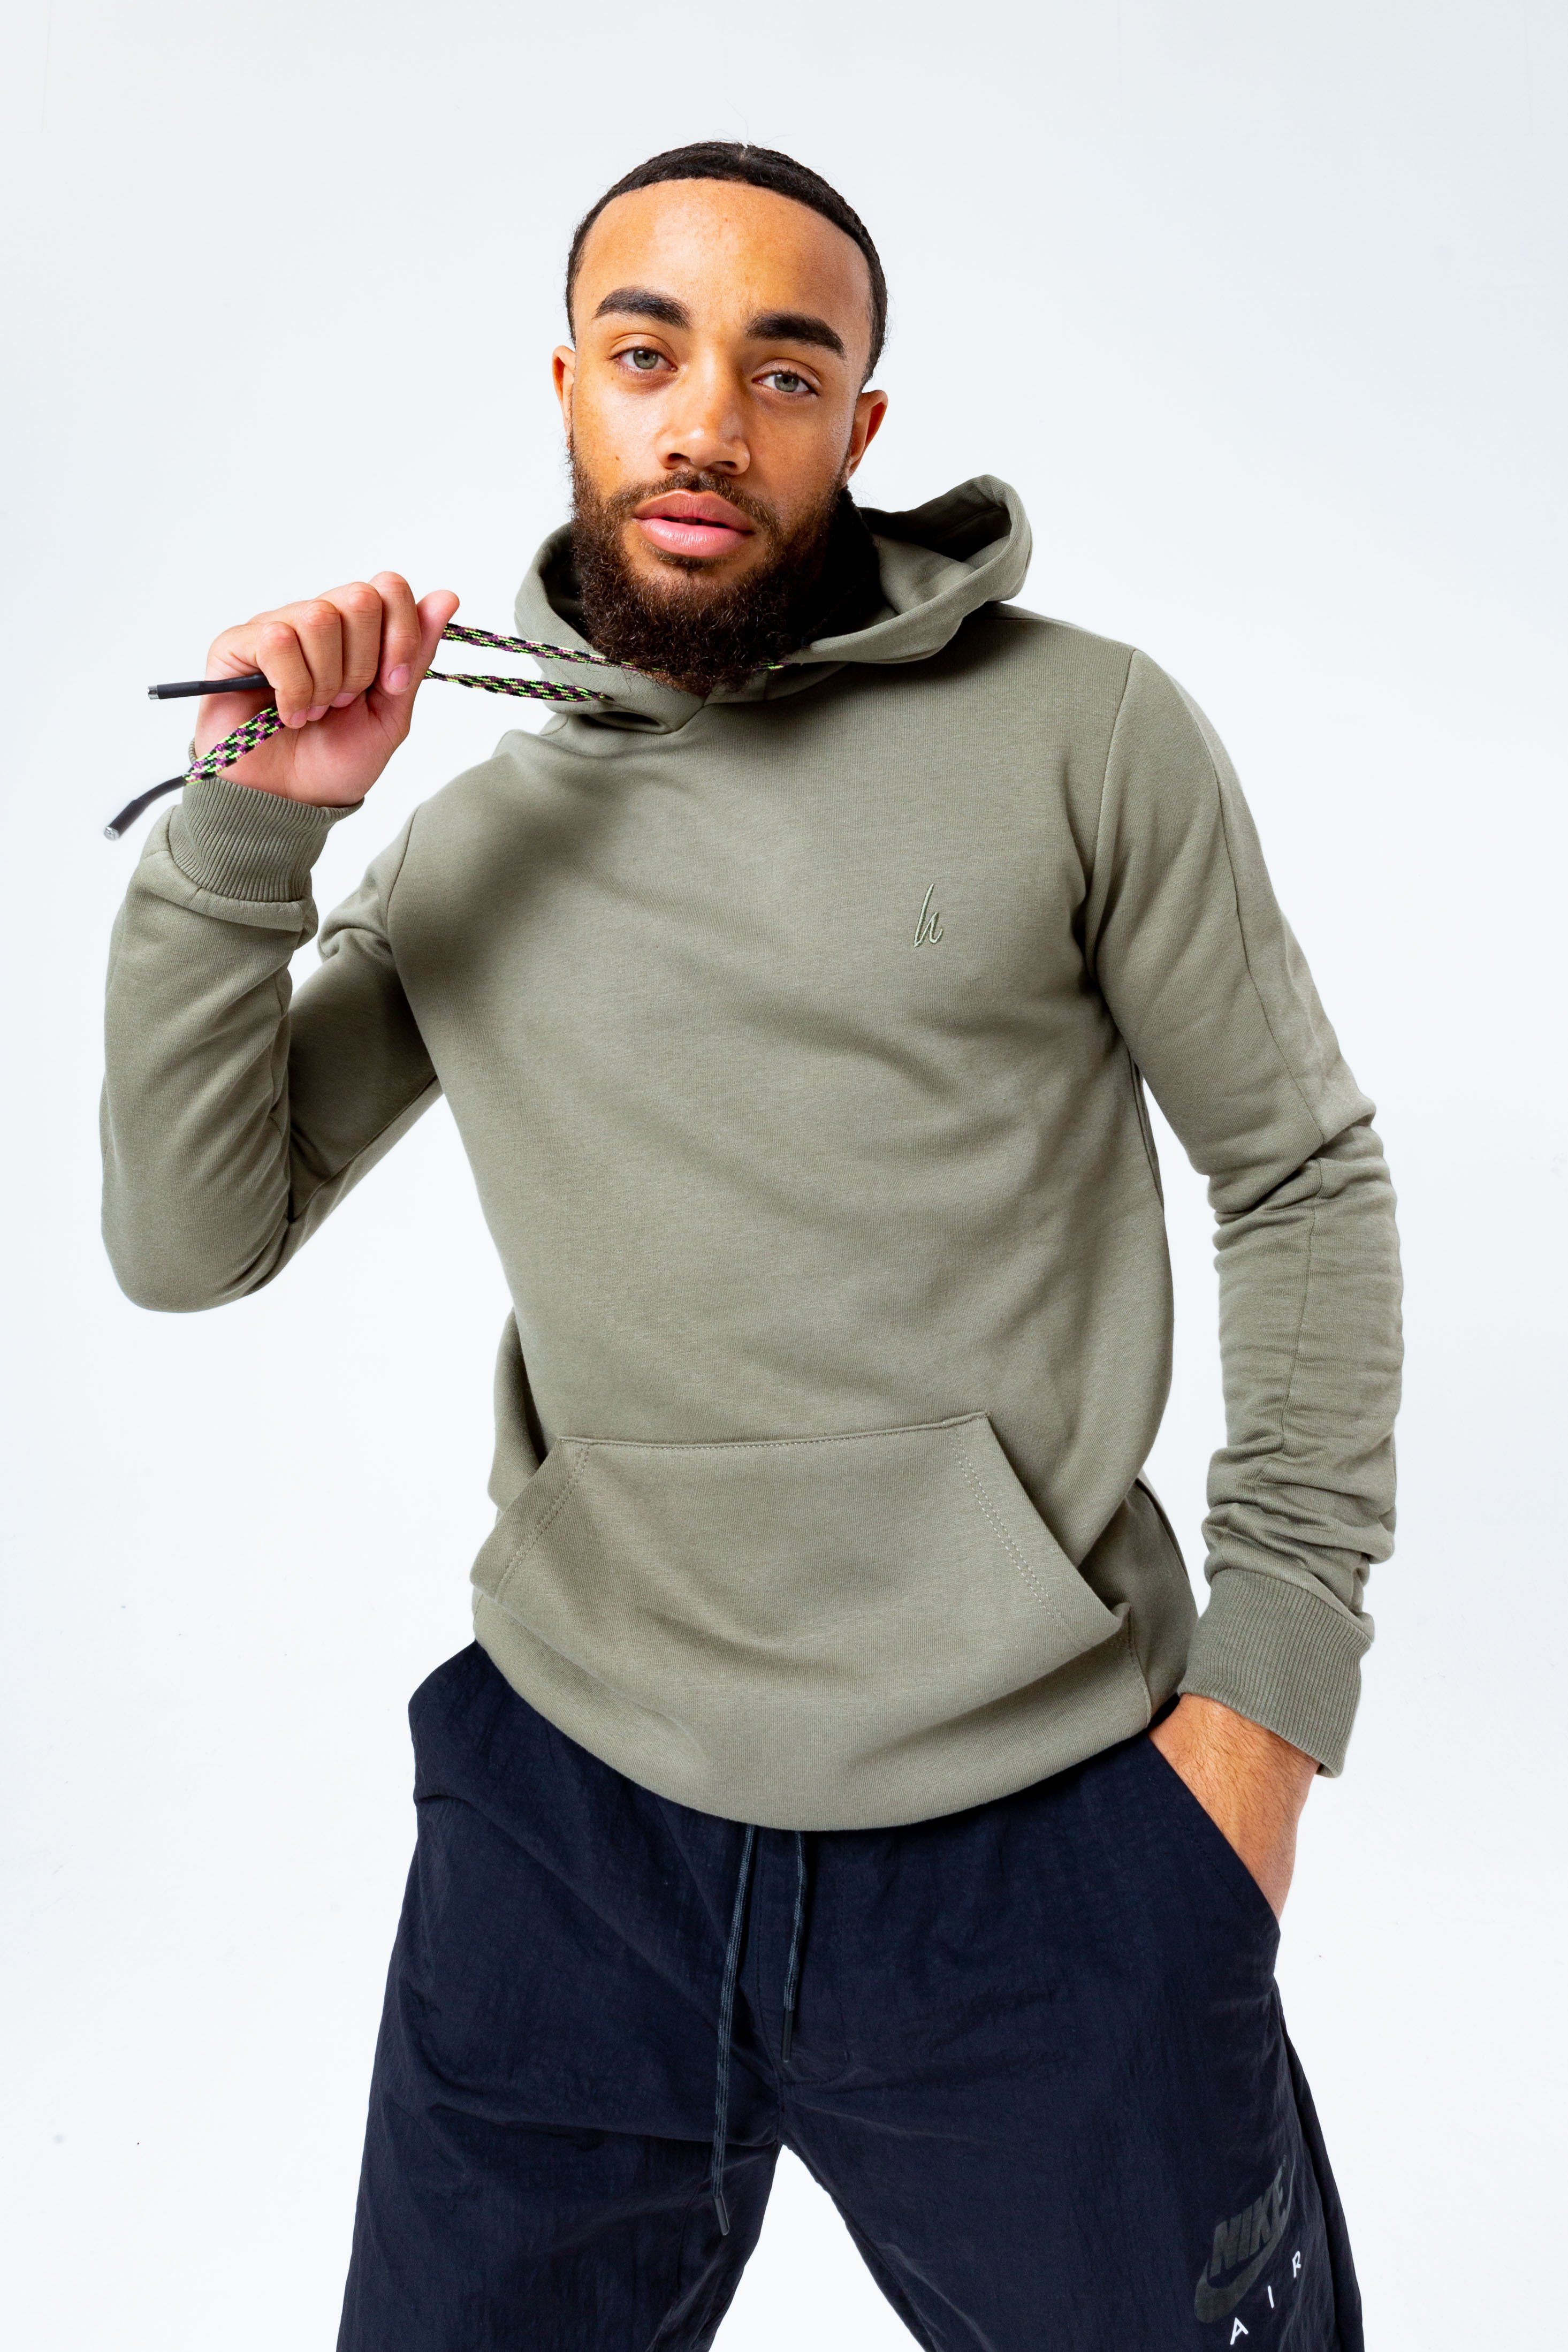 The HYPE. Olive Oversized Men's Pullover Hoodie is your new go-to everyday essential. Designed in our oversized men's hoodie shape, with a fixed hood, kangaroo pocket and fitted hem and cuffs. With a 80% cotton and 20% polyester fabric base for supreme comfort and breathable space. With a olive khaki colour palette, self fabric piping and extra long on-trend paracord strings. Finished with the new! embroidered just hype signature logo embroidered on the front. Wear with black skinny fit jeans for a smart casual look. Machine washable.